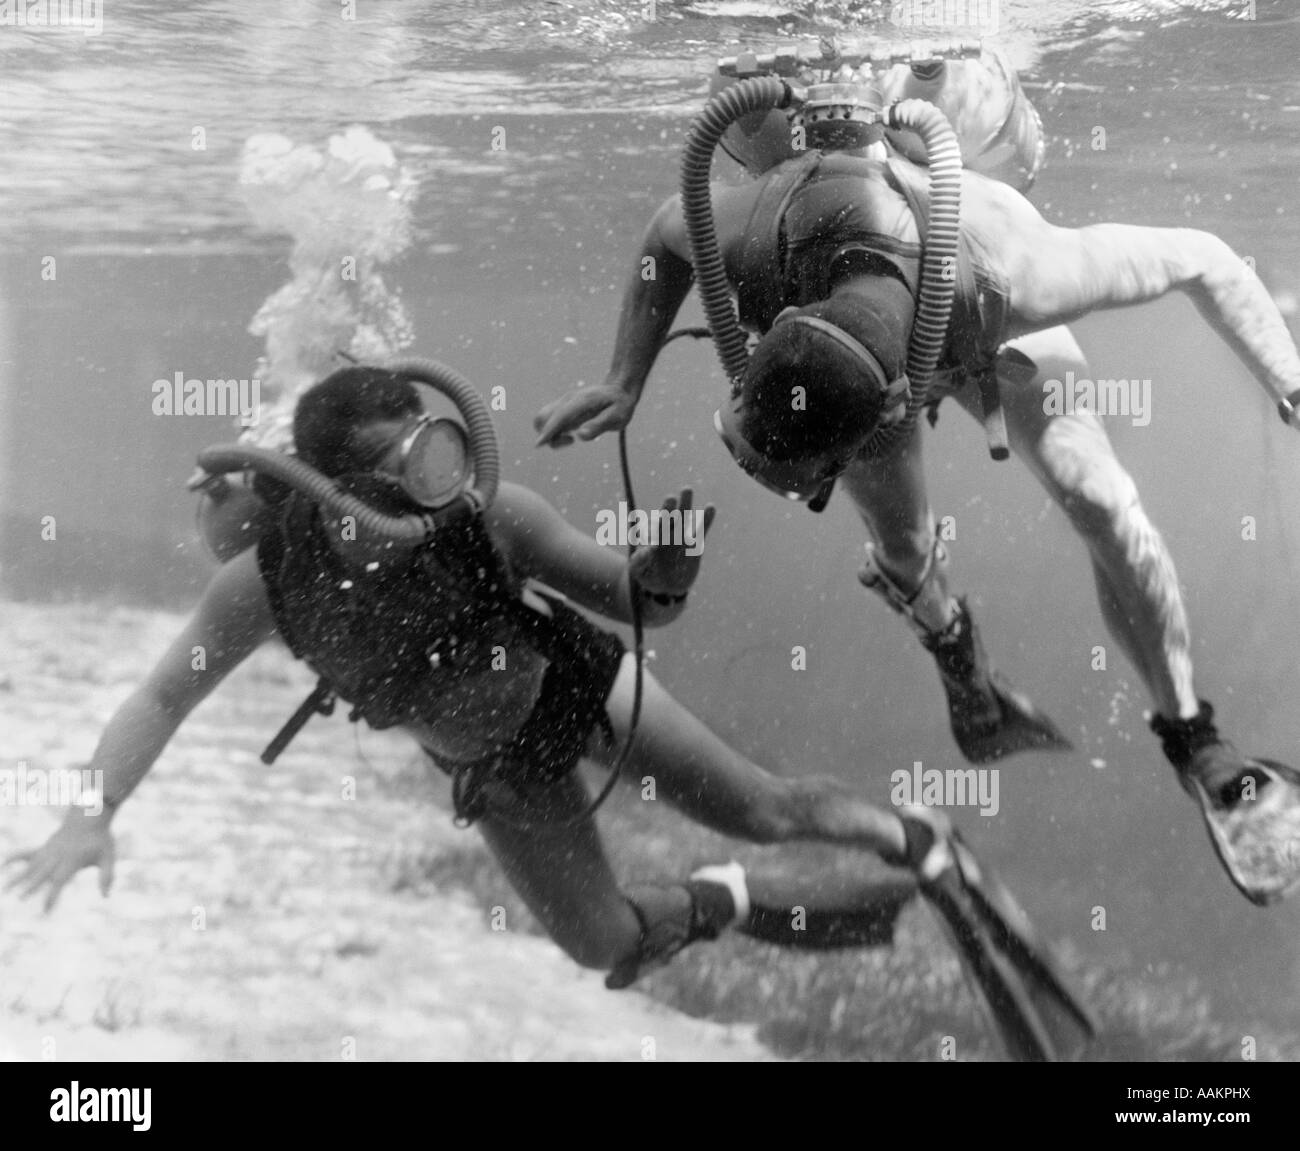 1960s PAIR OF DIVERS WITH TANKS & MASKS IN SHALLOW WATER NEAR GRASSY AREA OF OCEAN FLOOR Stock Photo